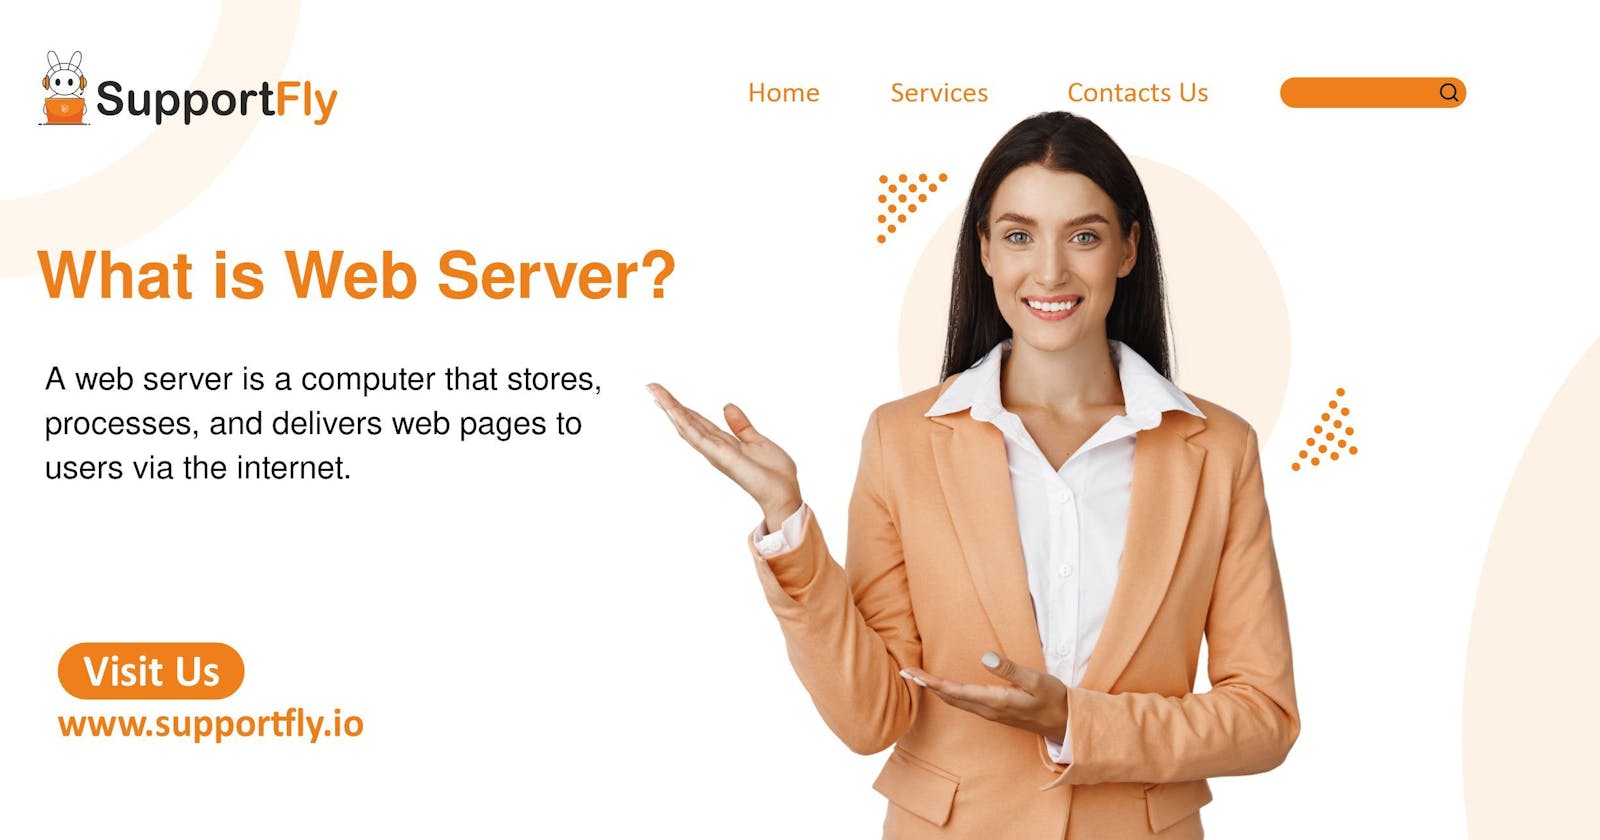 What is Web Server?